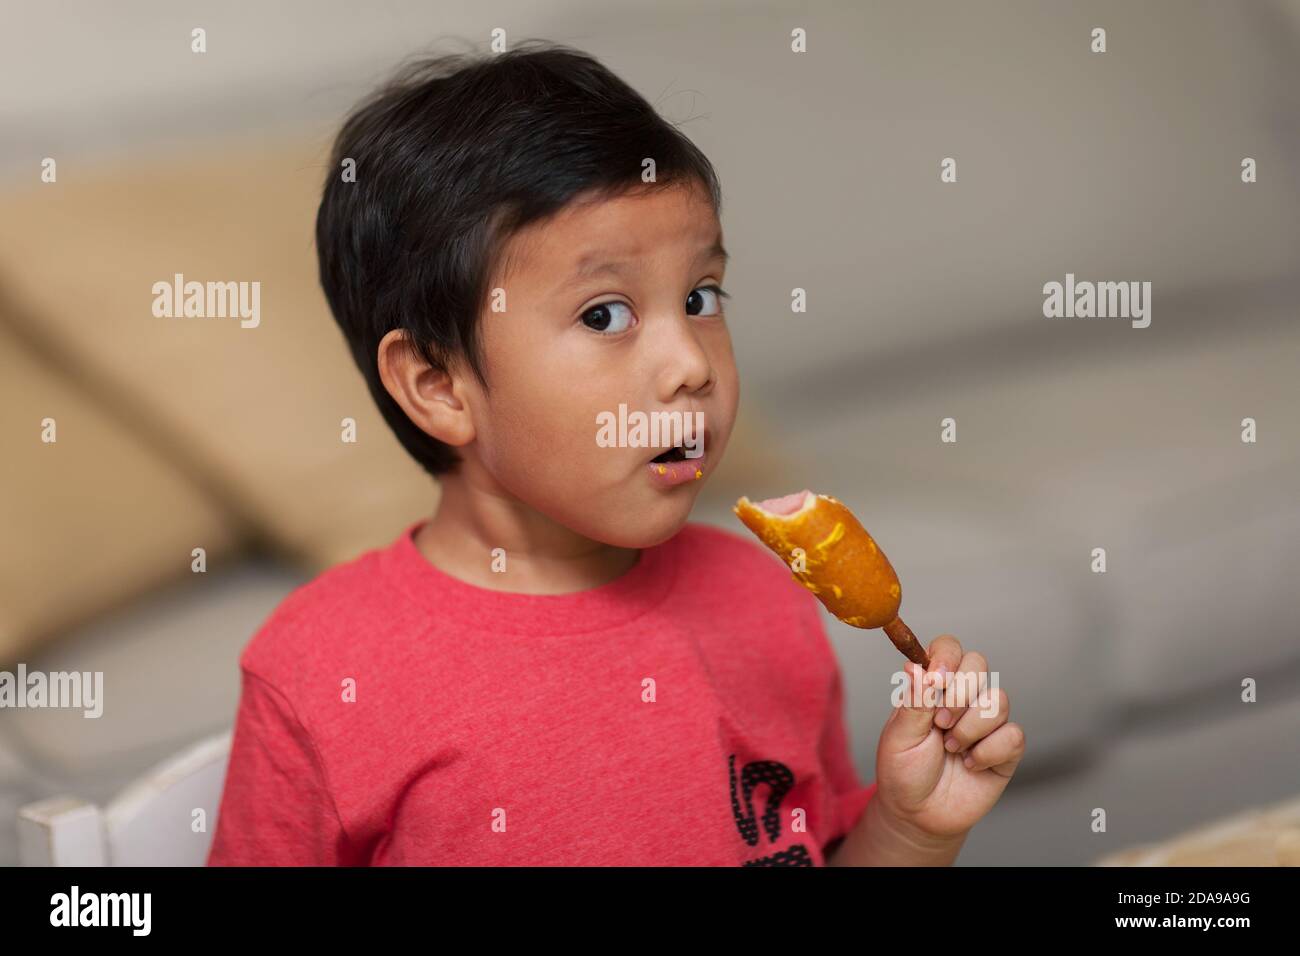 A young boy looks with awe as he takes a bite out of a homemade corn dog, a healthy snack. Stock Photo